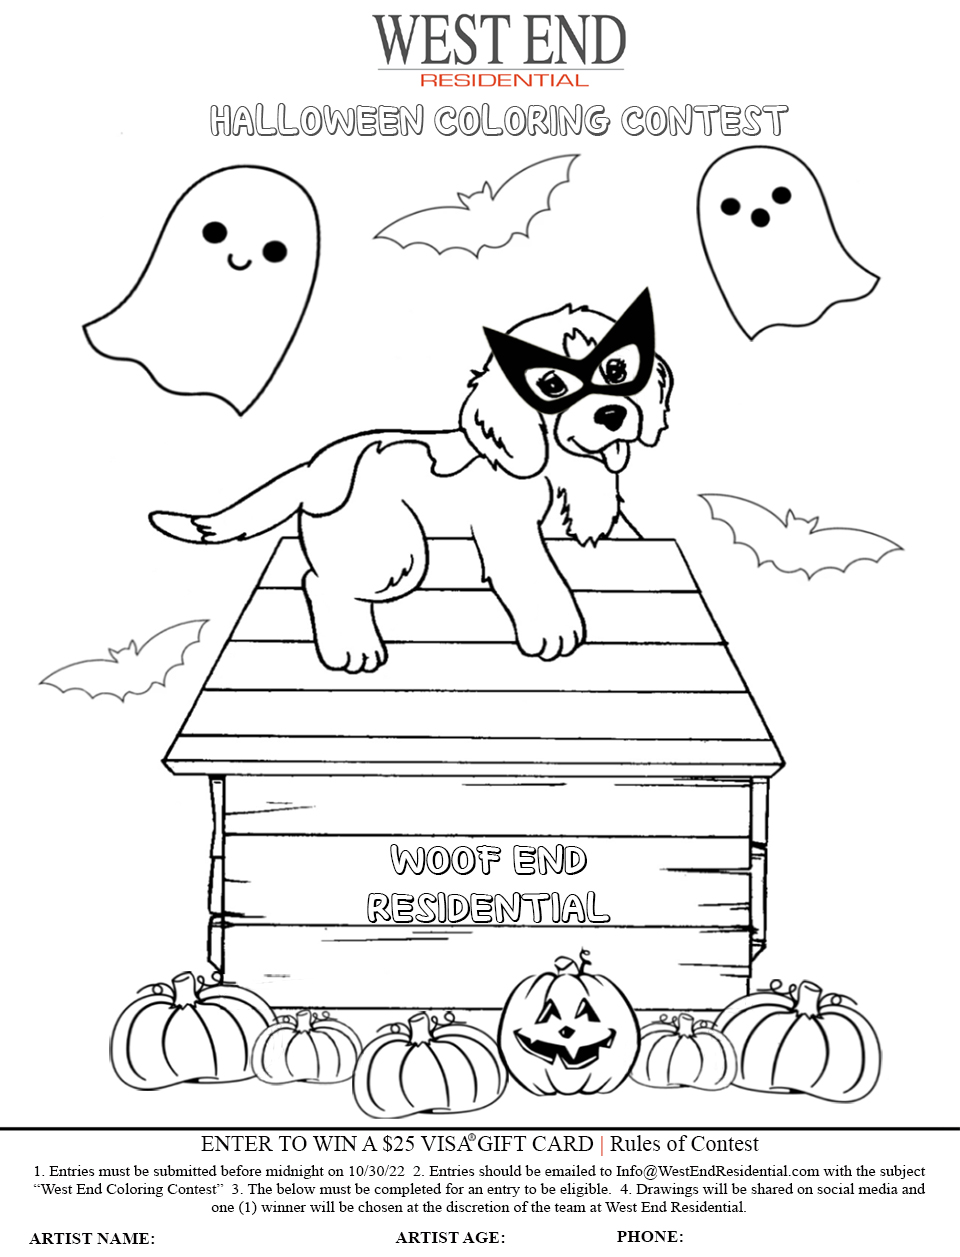 WEST END | HALLOWEEN COLORING CONTEST